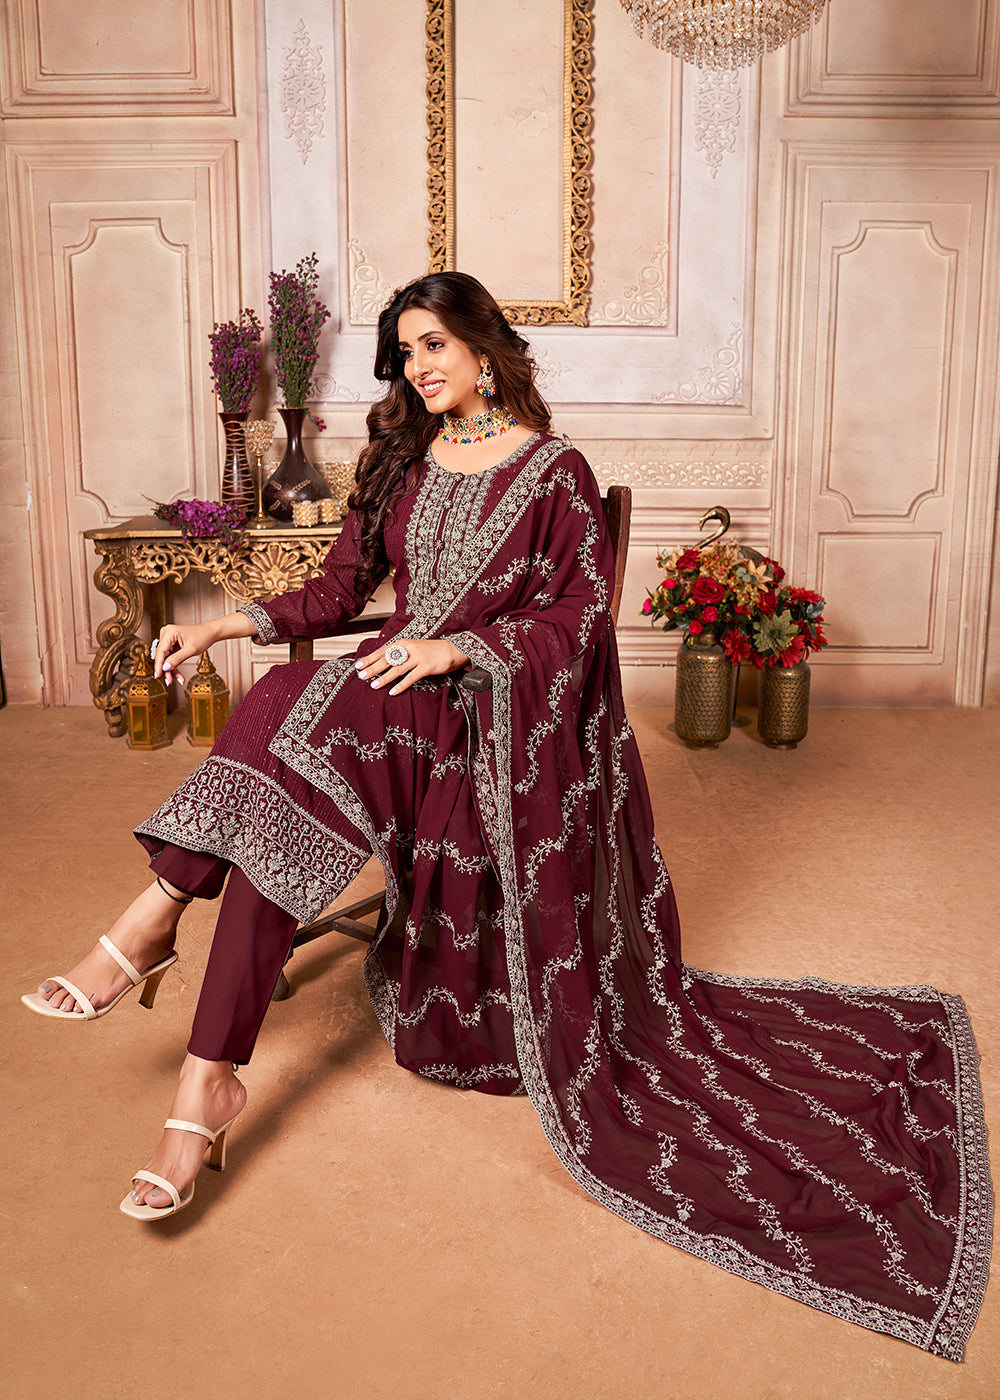 Buy Now Royal Maroon Indian Georgette Ceremonial Salwar Suit Online in USA, UK, Canada & Worldwide at Empress Clothing.